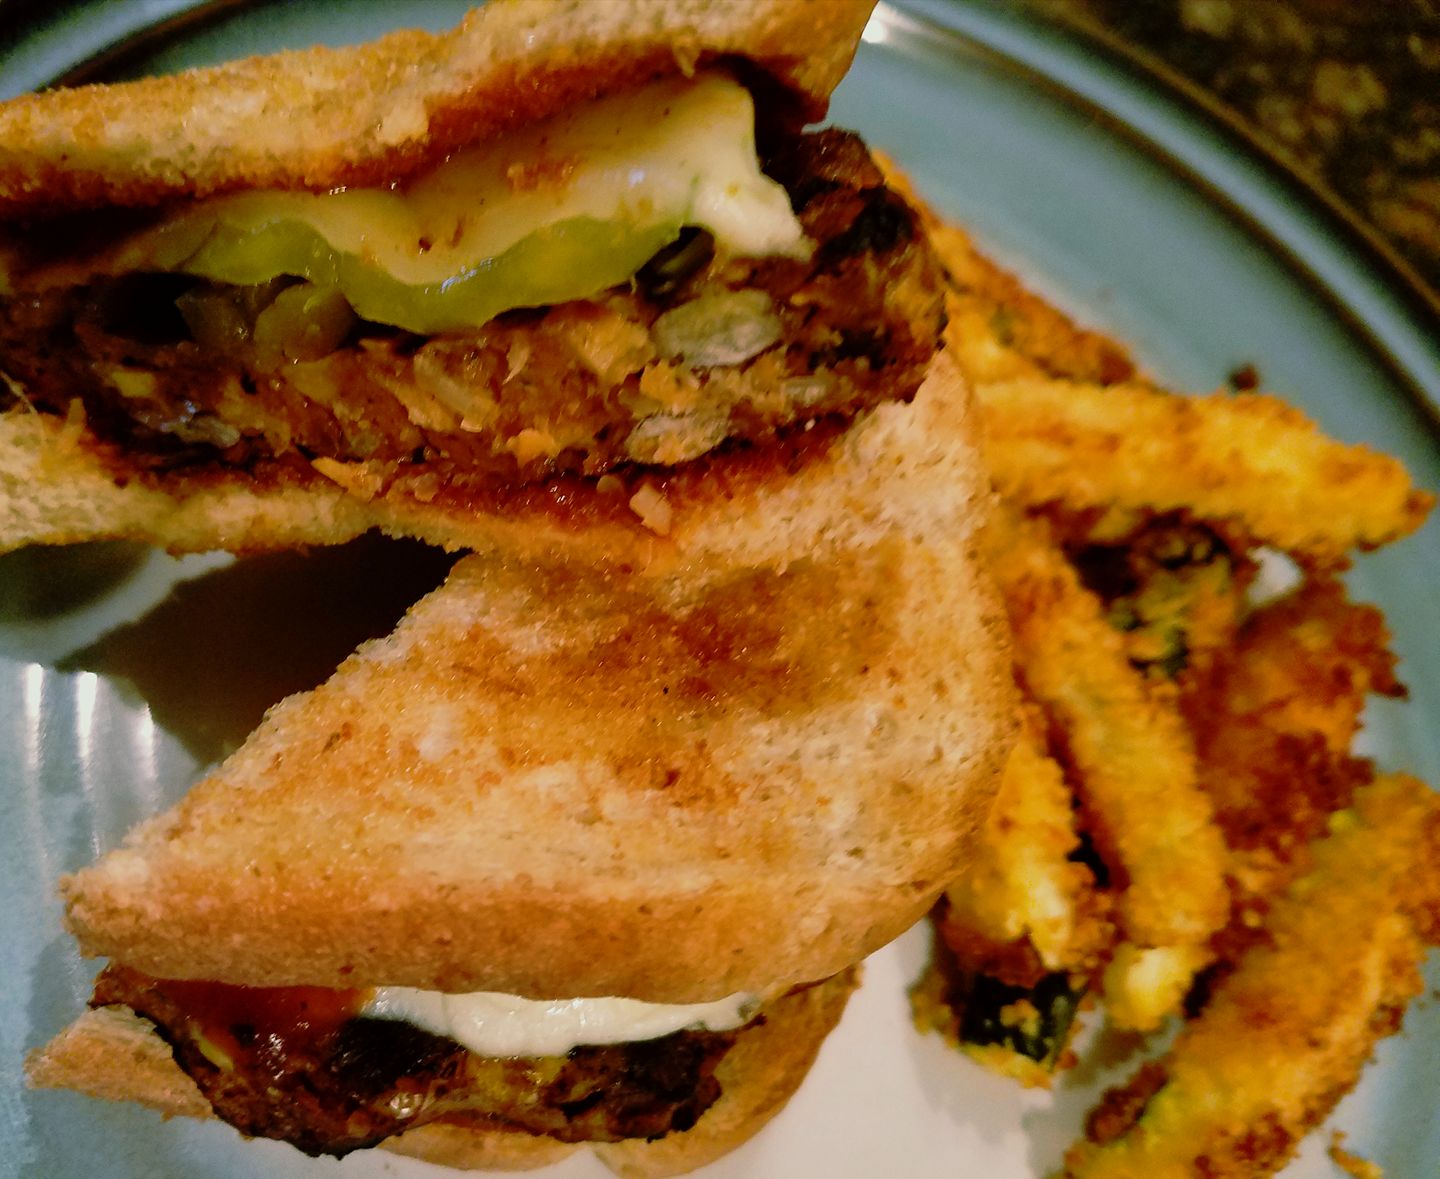 Spicy Black Bean Burger with Jalapenos and BBQ Sauce on Texas Toast